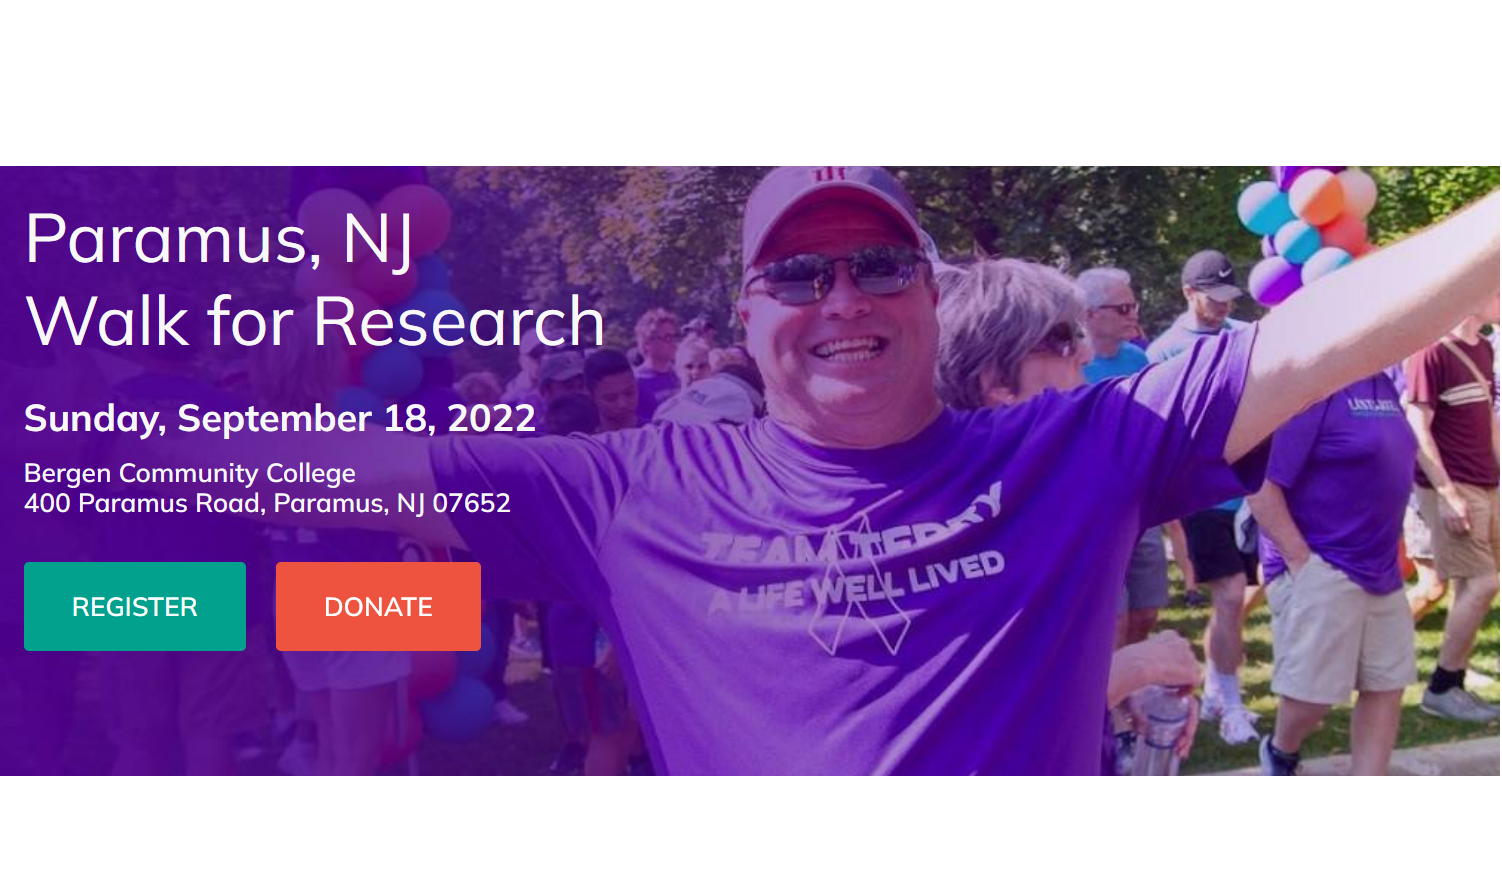 Weiner Law to Co-Sponsor Pancreatic Cancer Walk for Research